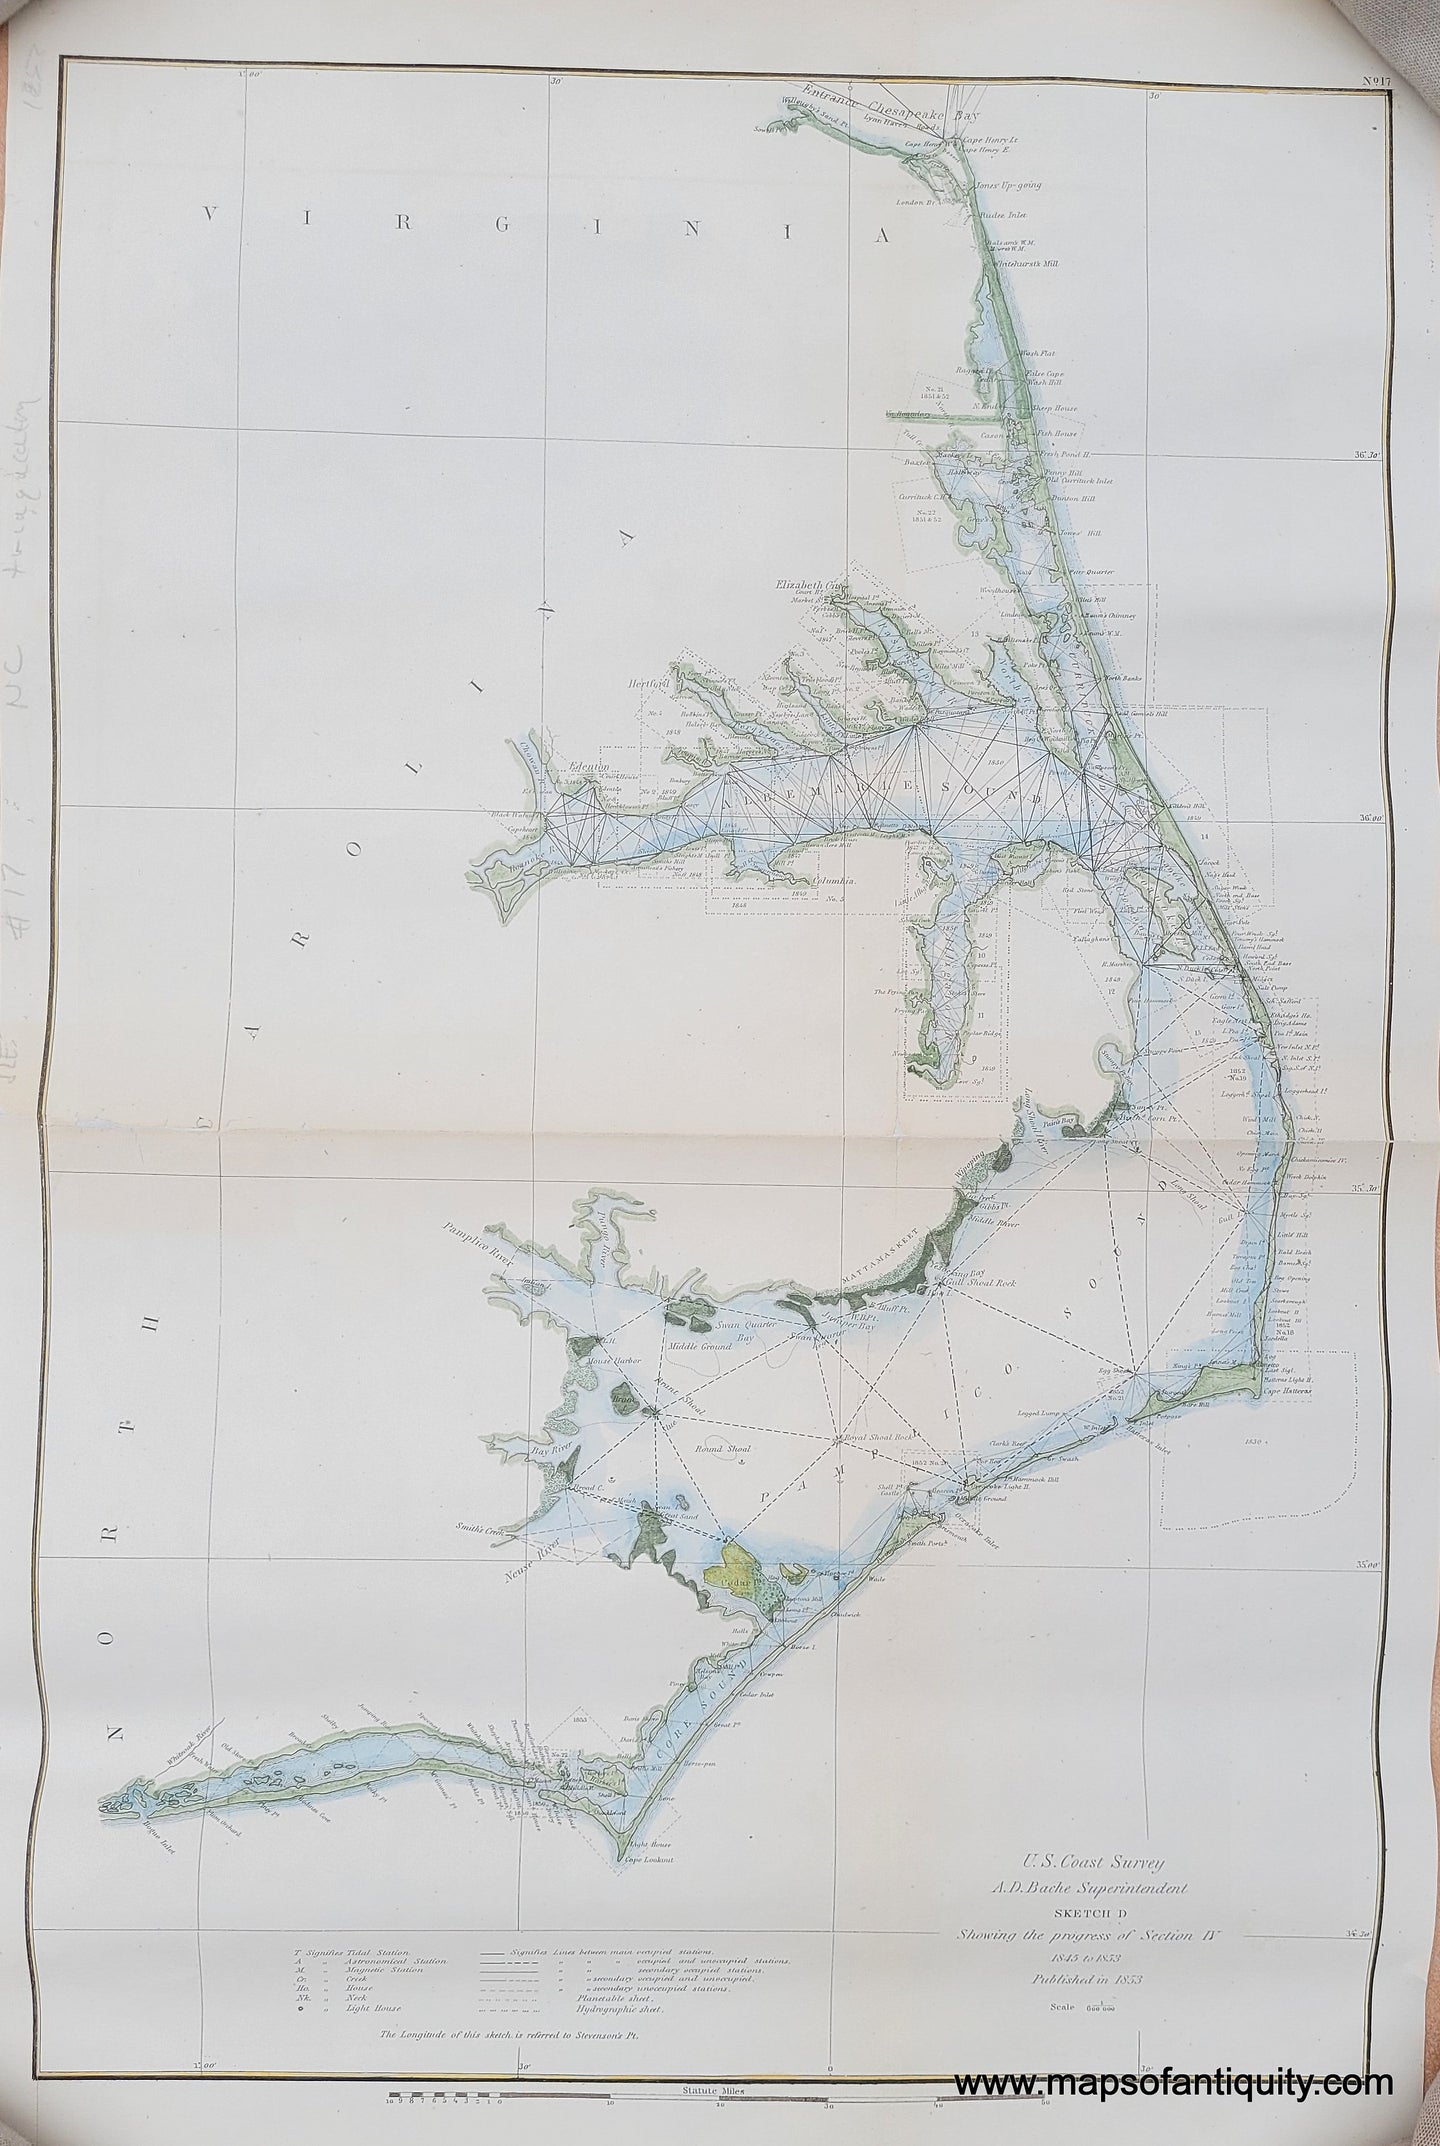 Antique-Hand-Colored-Coastal-Chart-Outer-Banks-North-Carolina-Pamlico-and-Albemarle-Sound-NC-Sketch-D-Section-IV-Triangulation-Chart--**********-United-States-South-1853-U.S.-Coast-Survey-Maps-Of-Antiquity